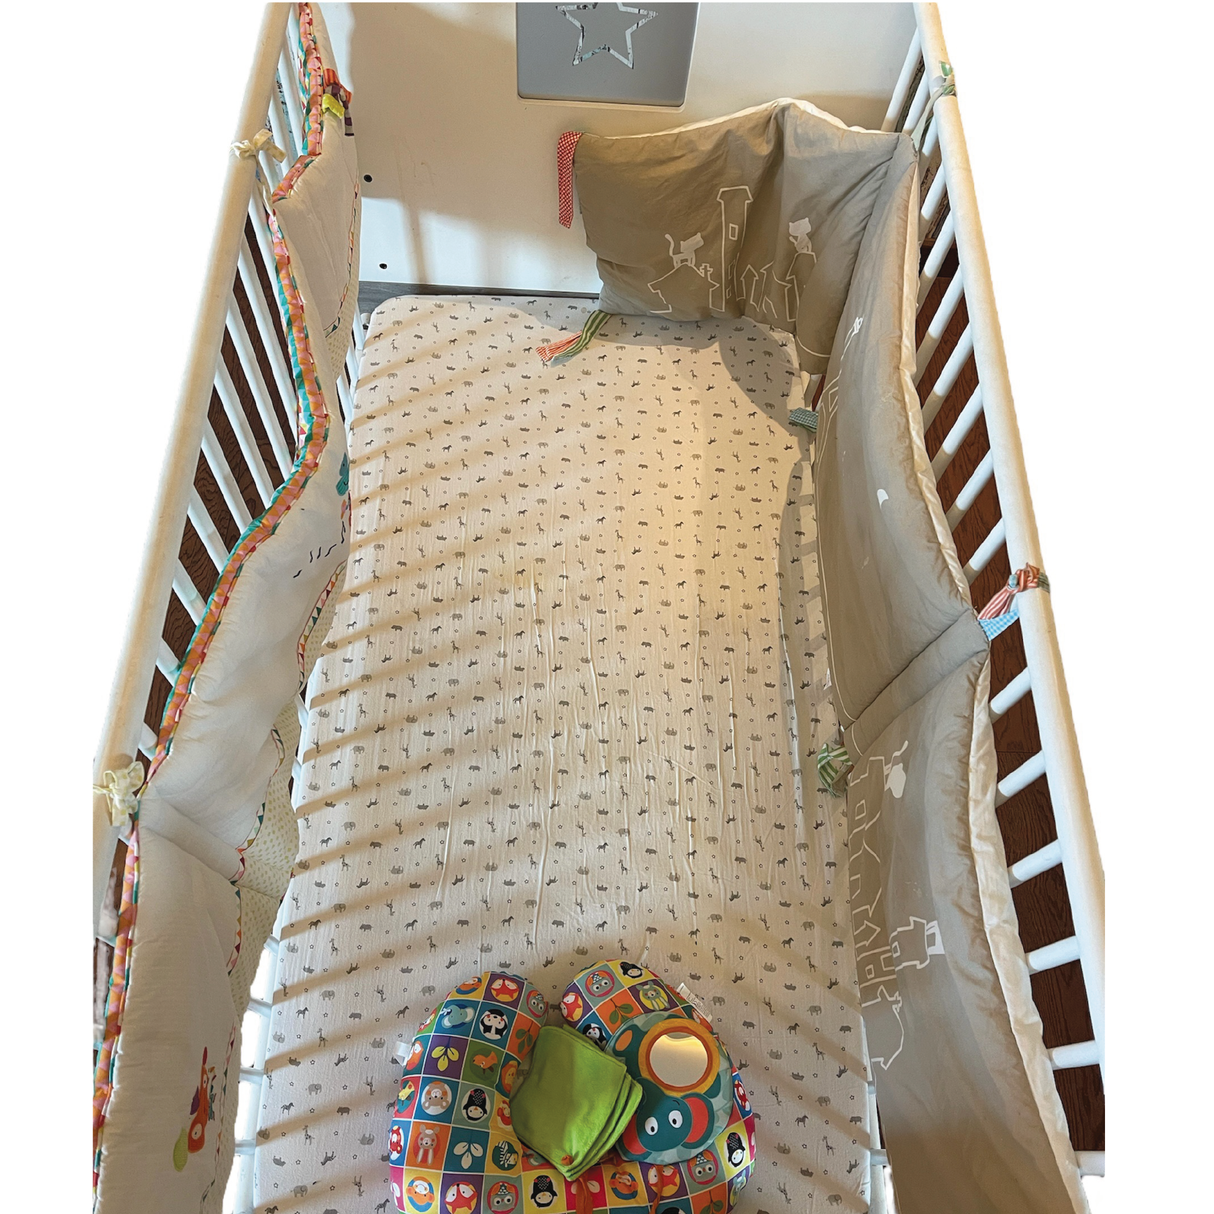 A Second Chance - Baby Crib and Mattress Babies